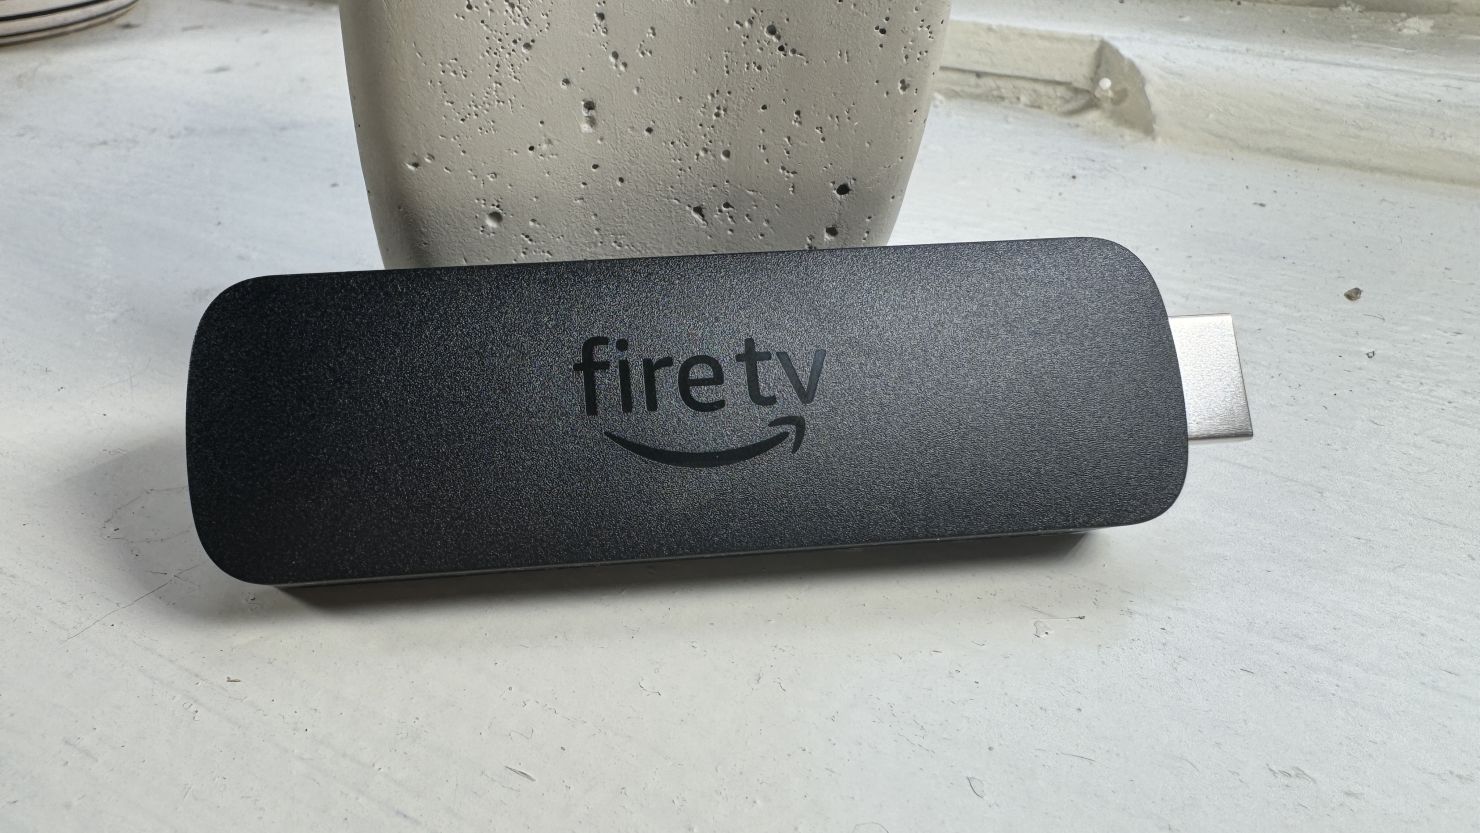 You Can Jailbreak Your  Fire TV Stick (But Should You?)